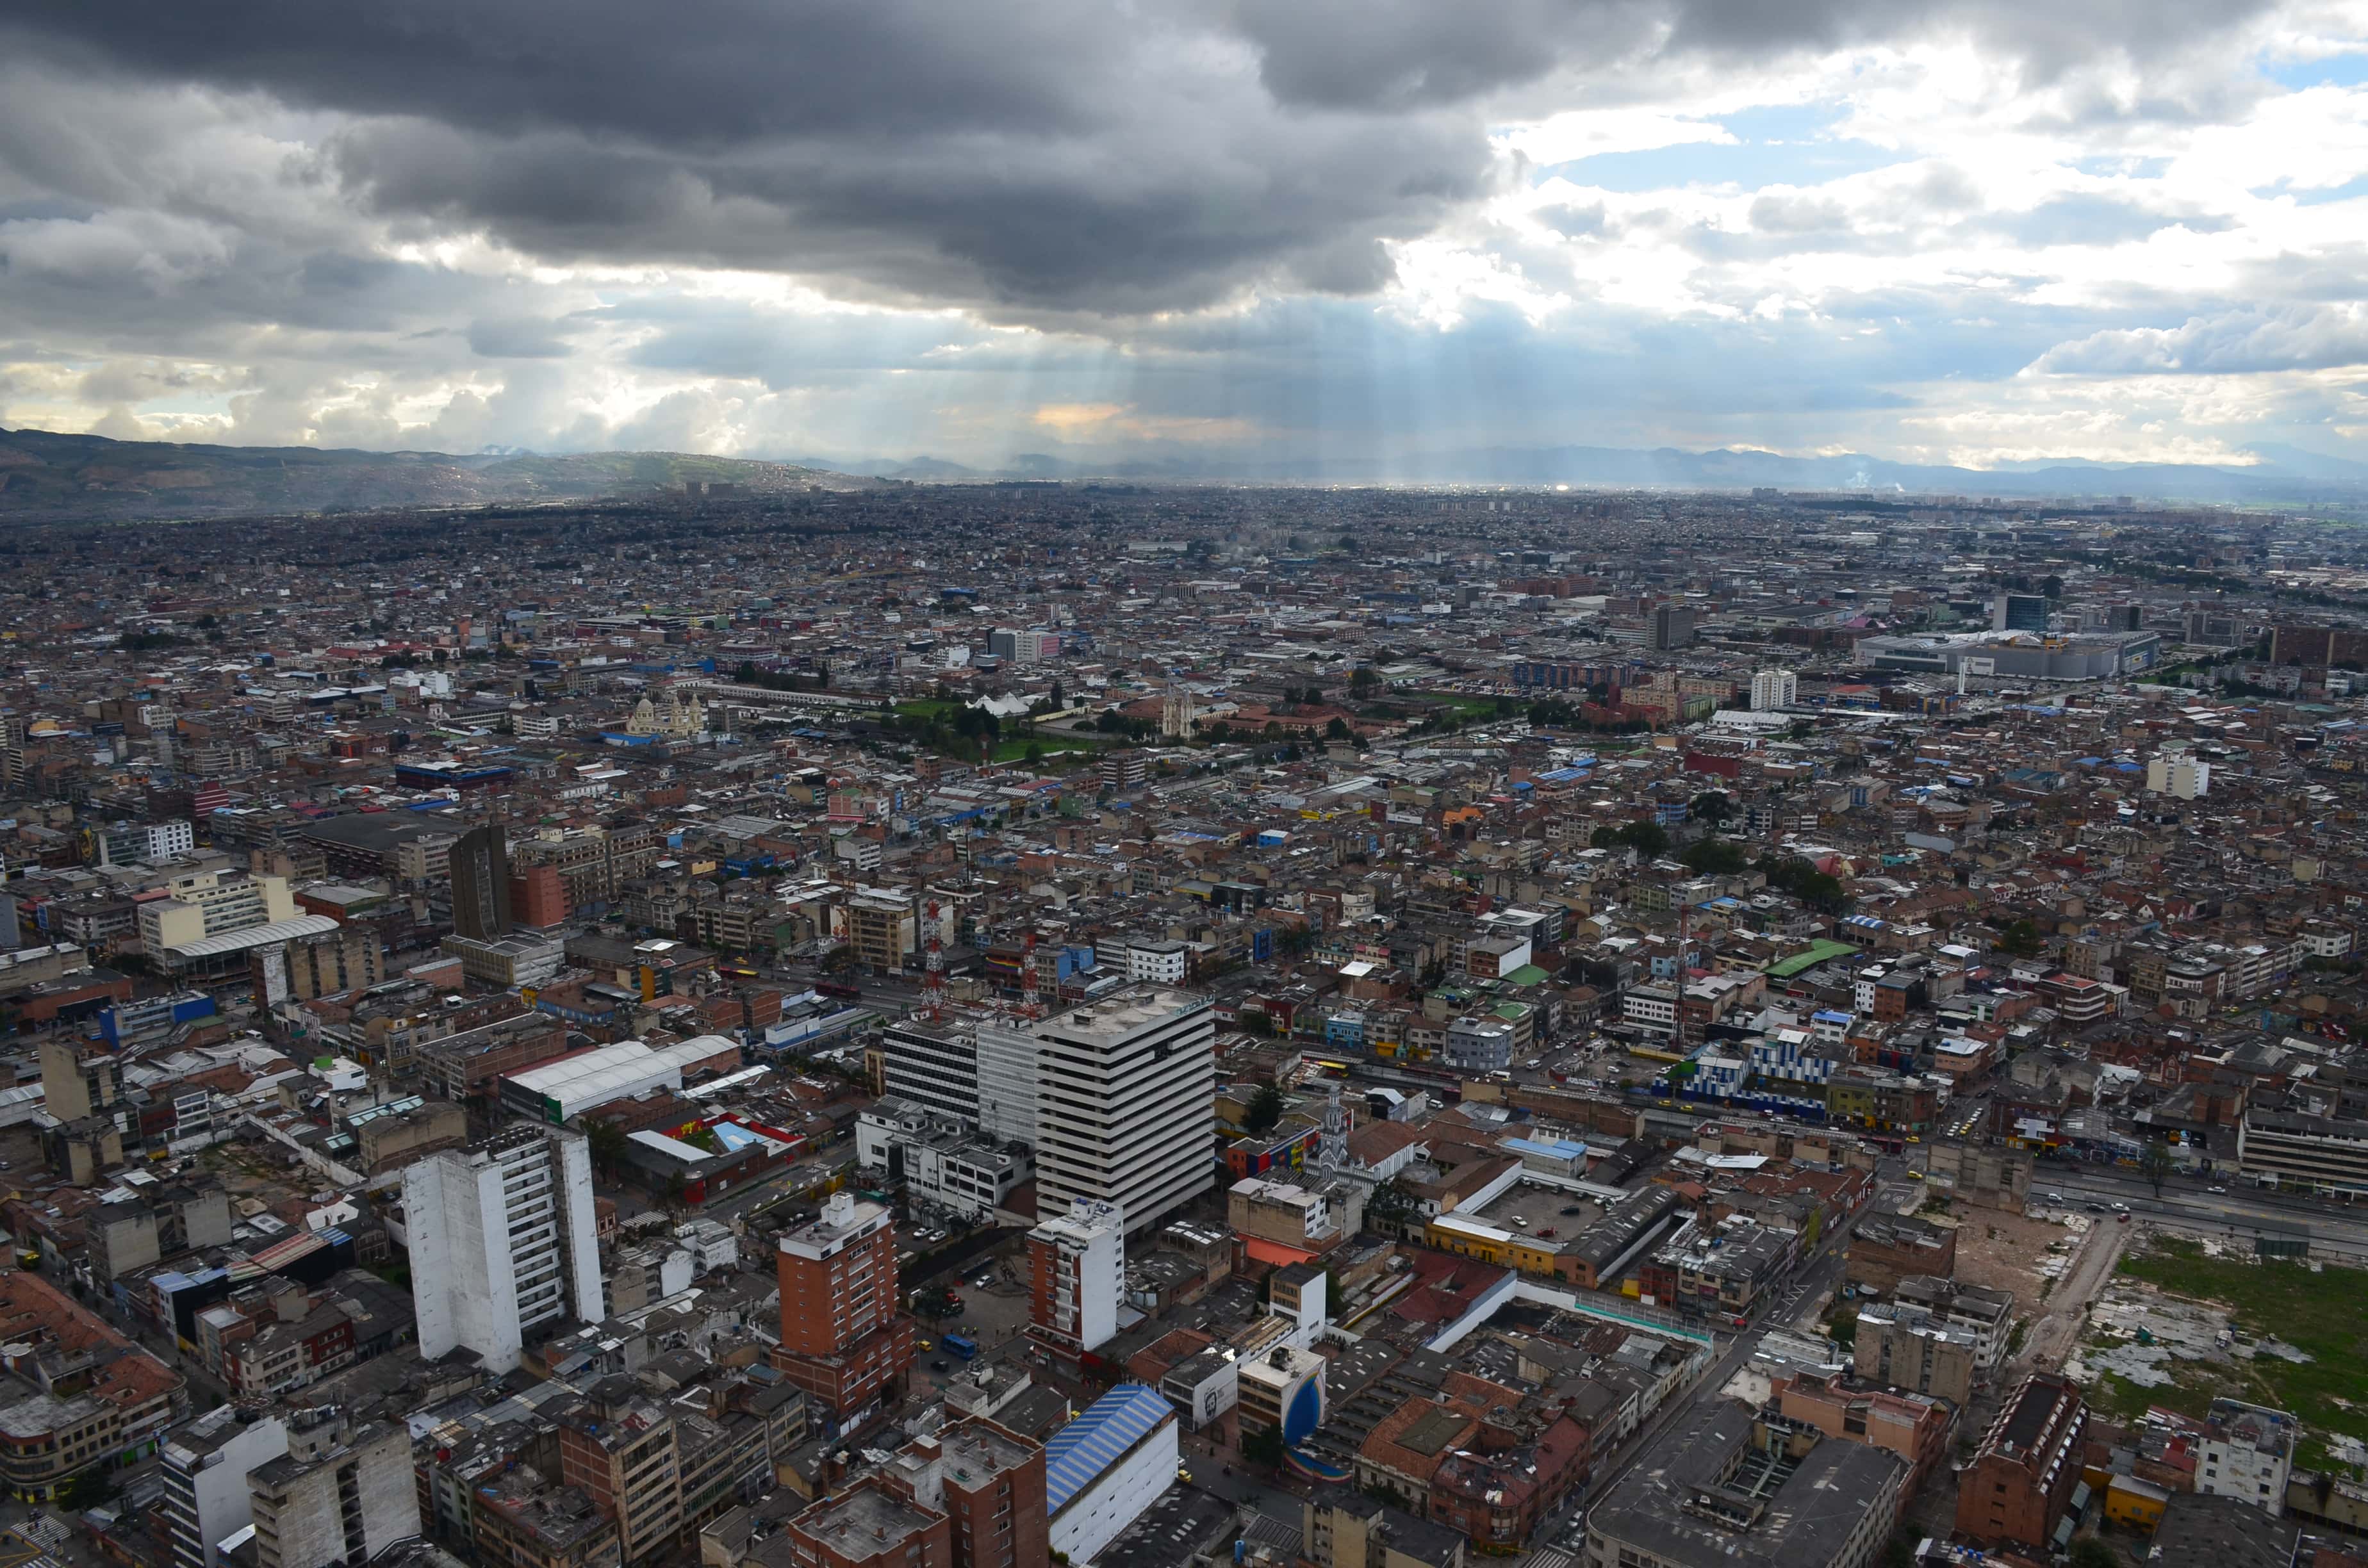 The view from Torre Colpatria in Bogotá, Colombia